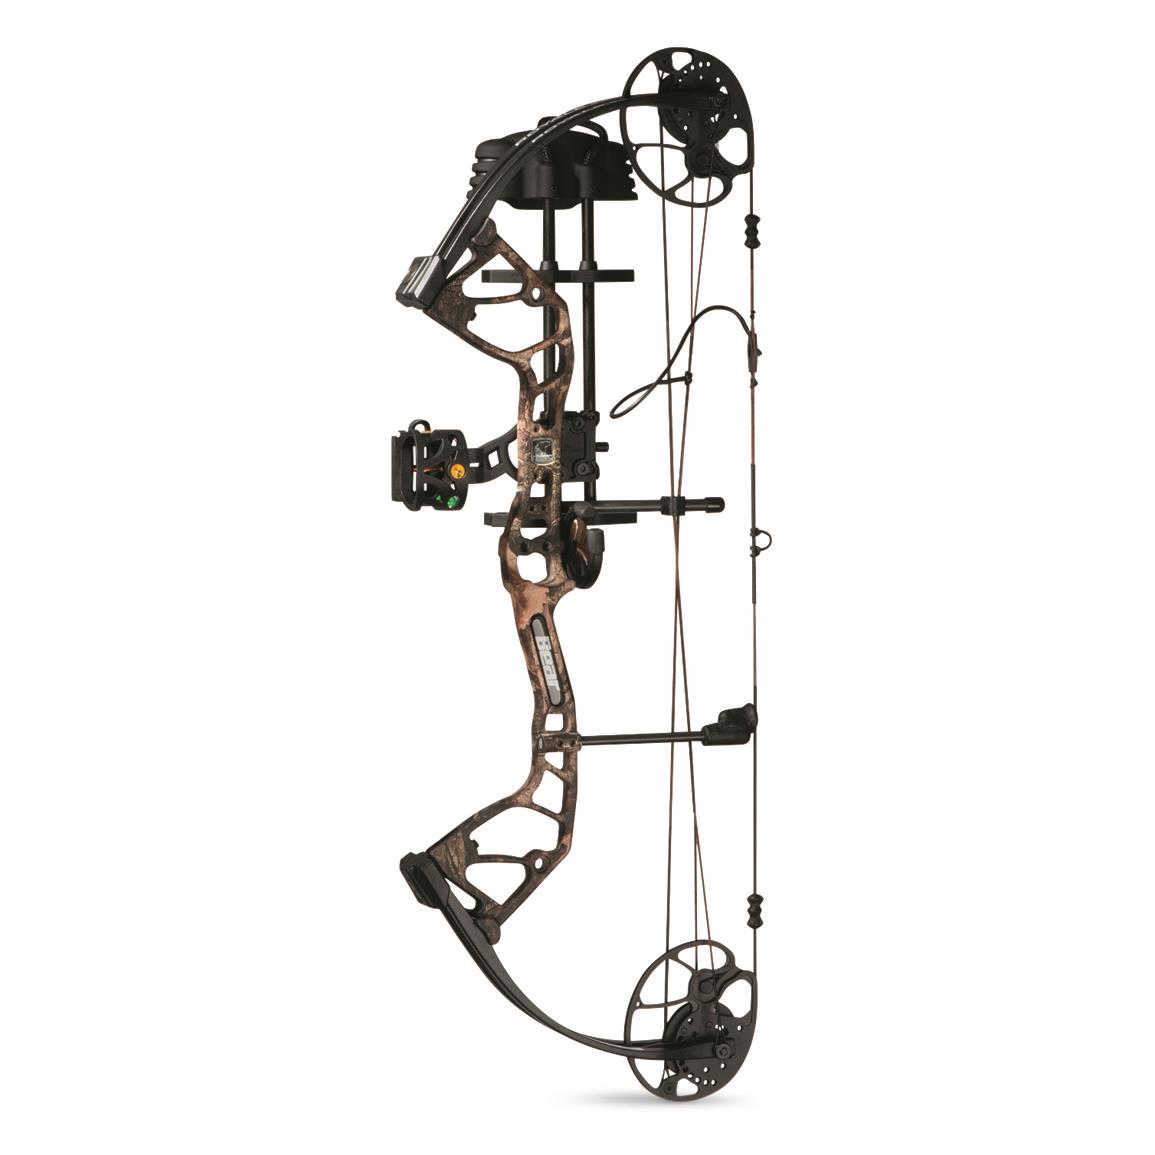 Bear Archery Royale Ready-to-Hunt Compound Bow Package, 5-50 lb. Draw Weight, Mossy Oak® Country DNA™